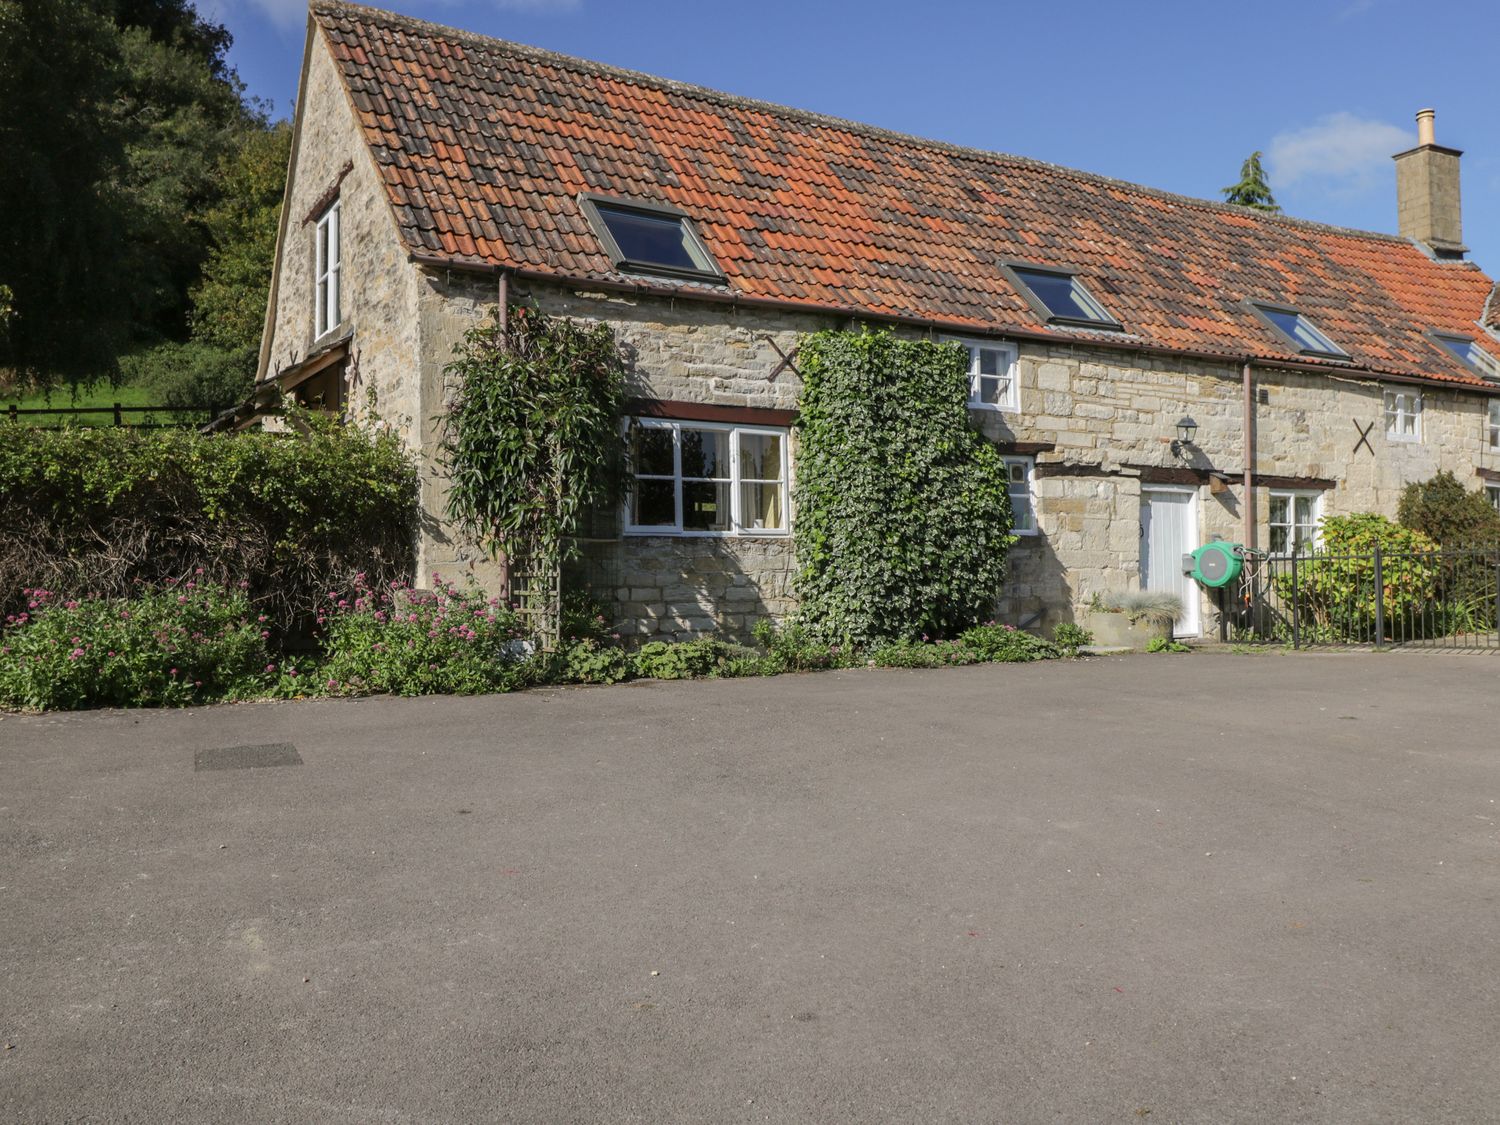 Hay Barn Cottage - Cotswolds - 1049432 - photo 1